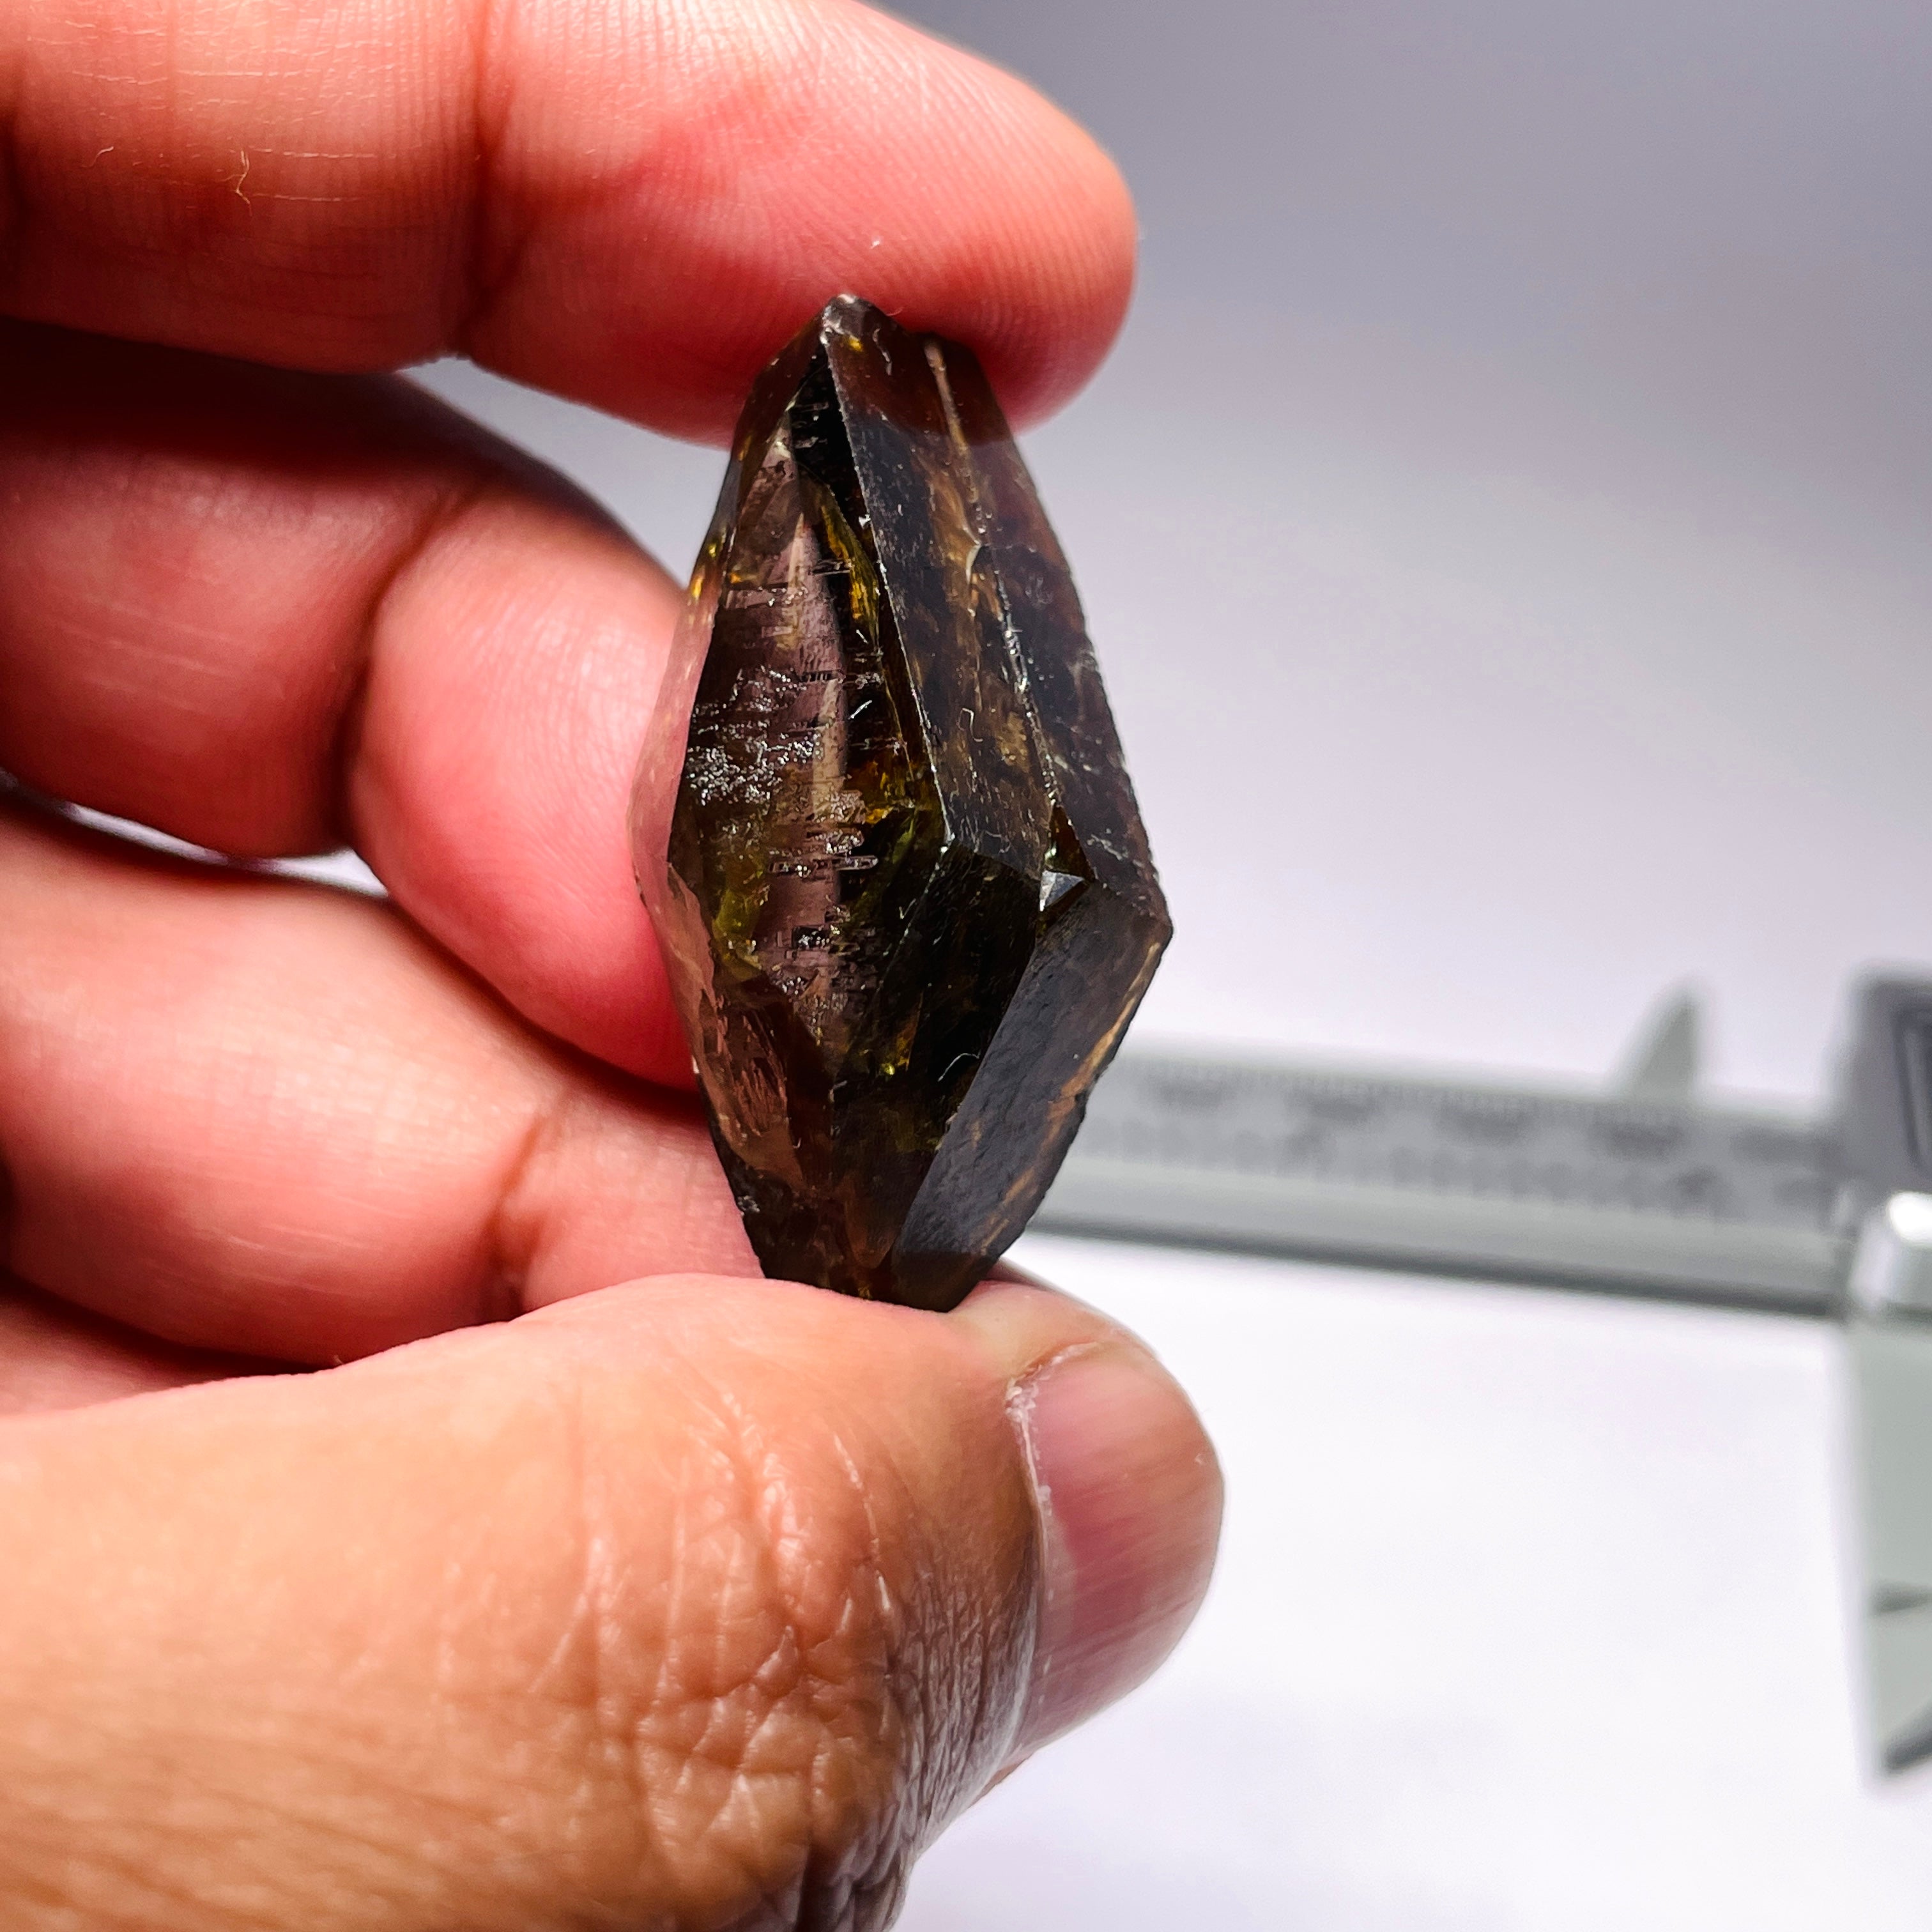 80.67Ct/16.13Gm Tanzanian Sphene Crystal Untreated Unheated. 38.4 X 15.5 19.6Mm Very High End Ultra